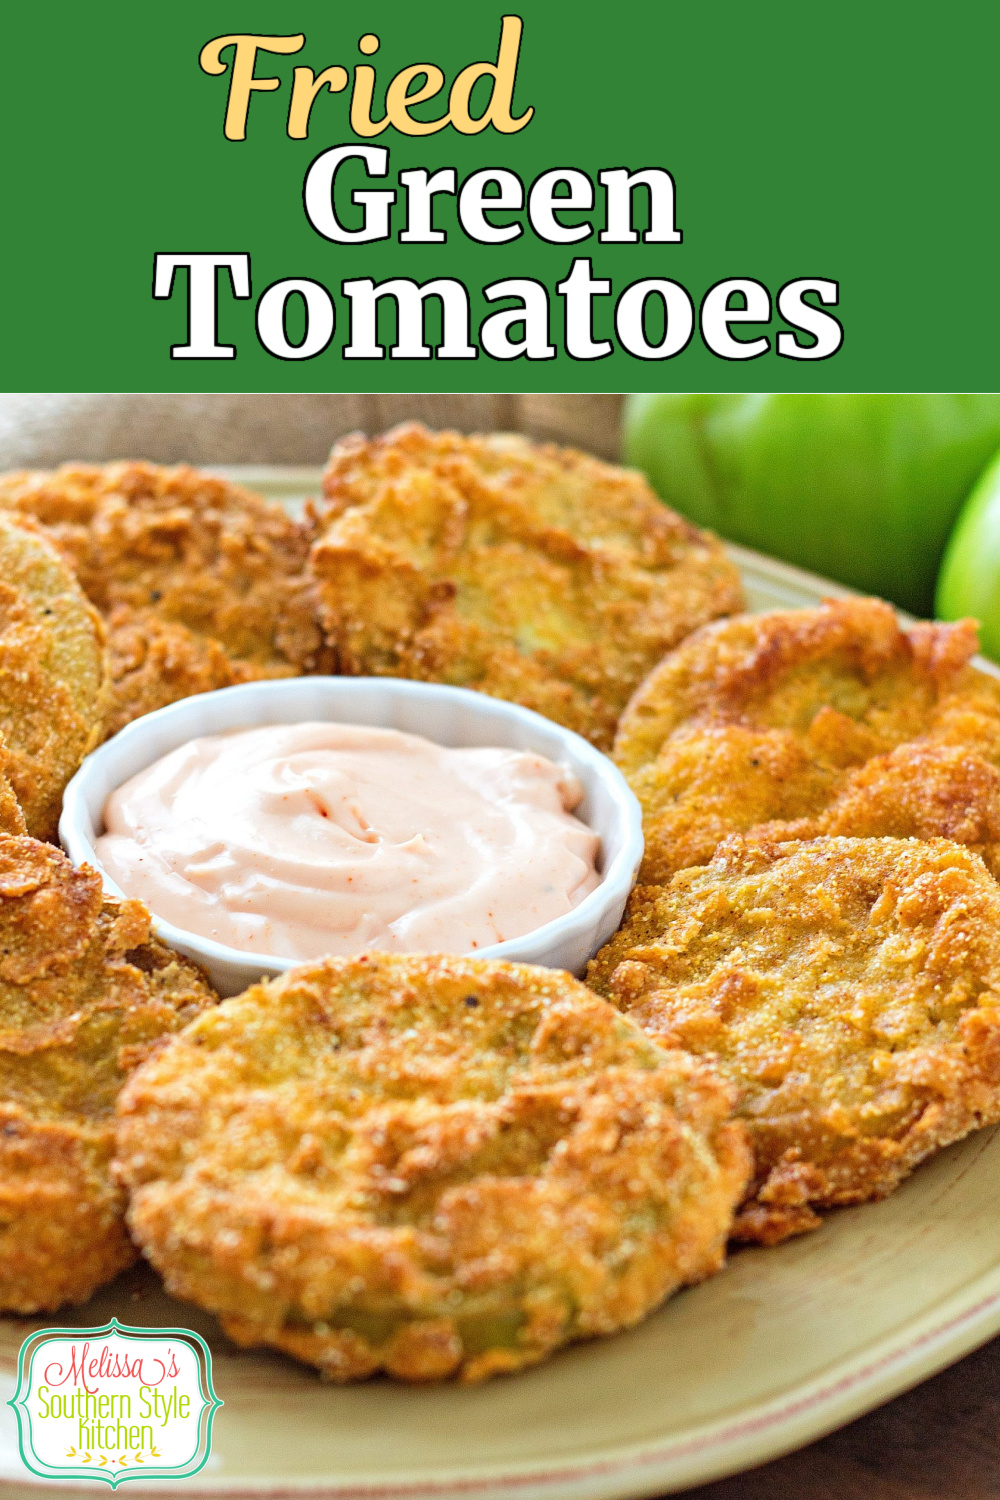 Fried Green Tomatoes are a time-honored Summer tradition in the South #friedgreentomatoes #greentomaotes #tomatorecipes #gardening #appetizers #sidedishrecipes #dinnerideas #southernfood #southernrecipes via @melissasssk